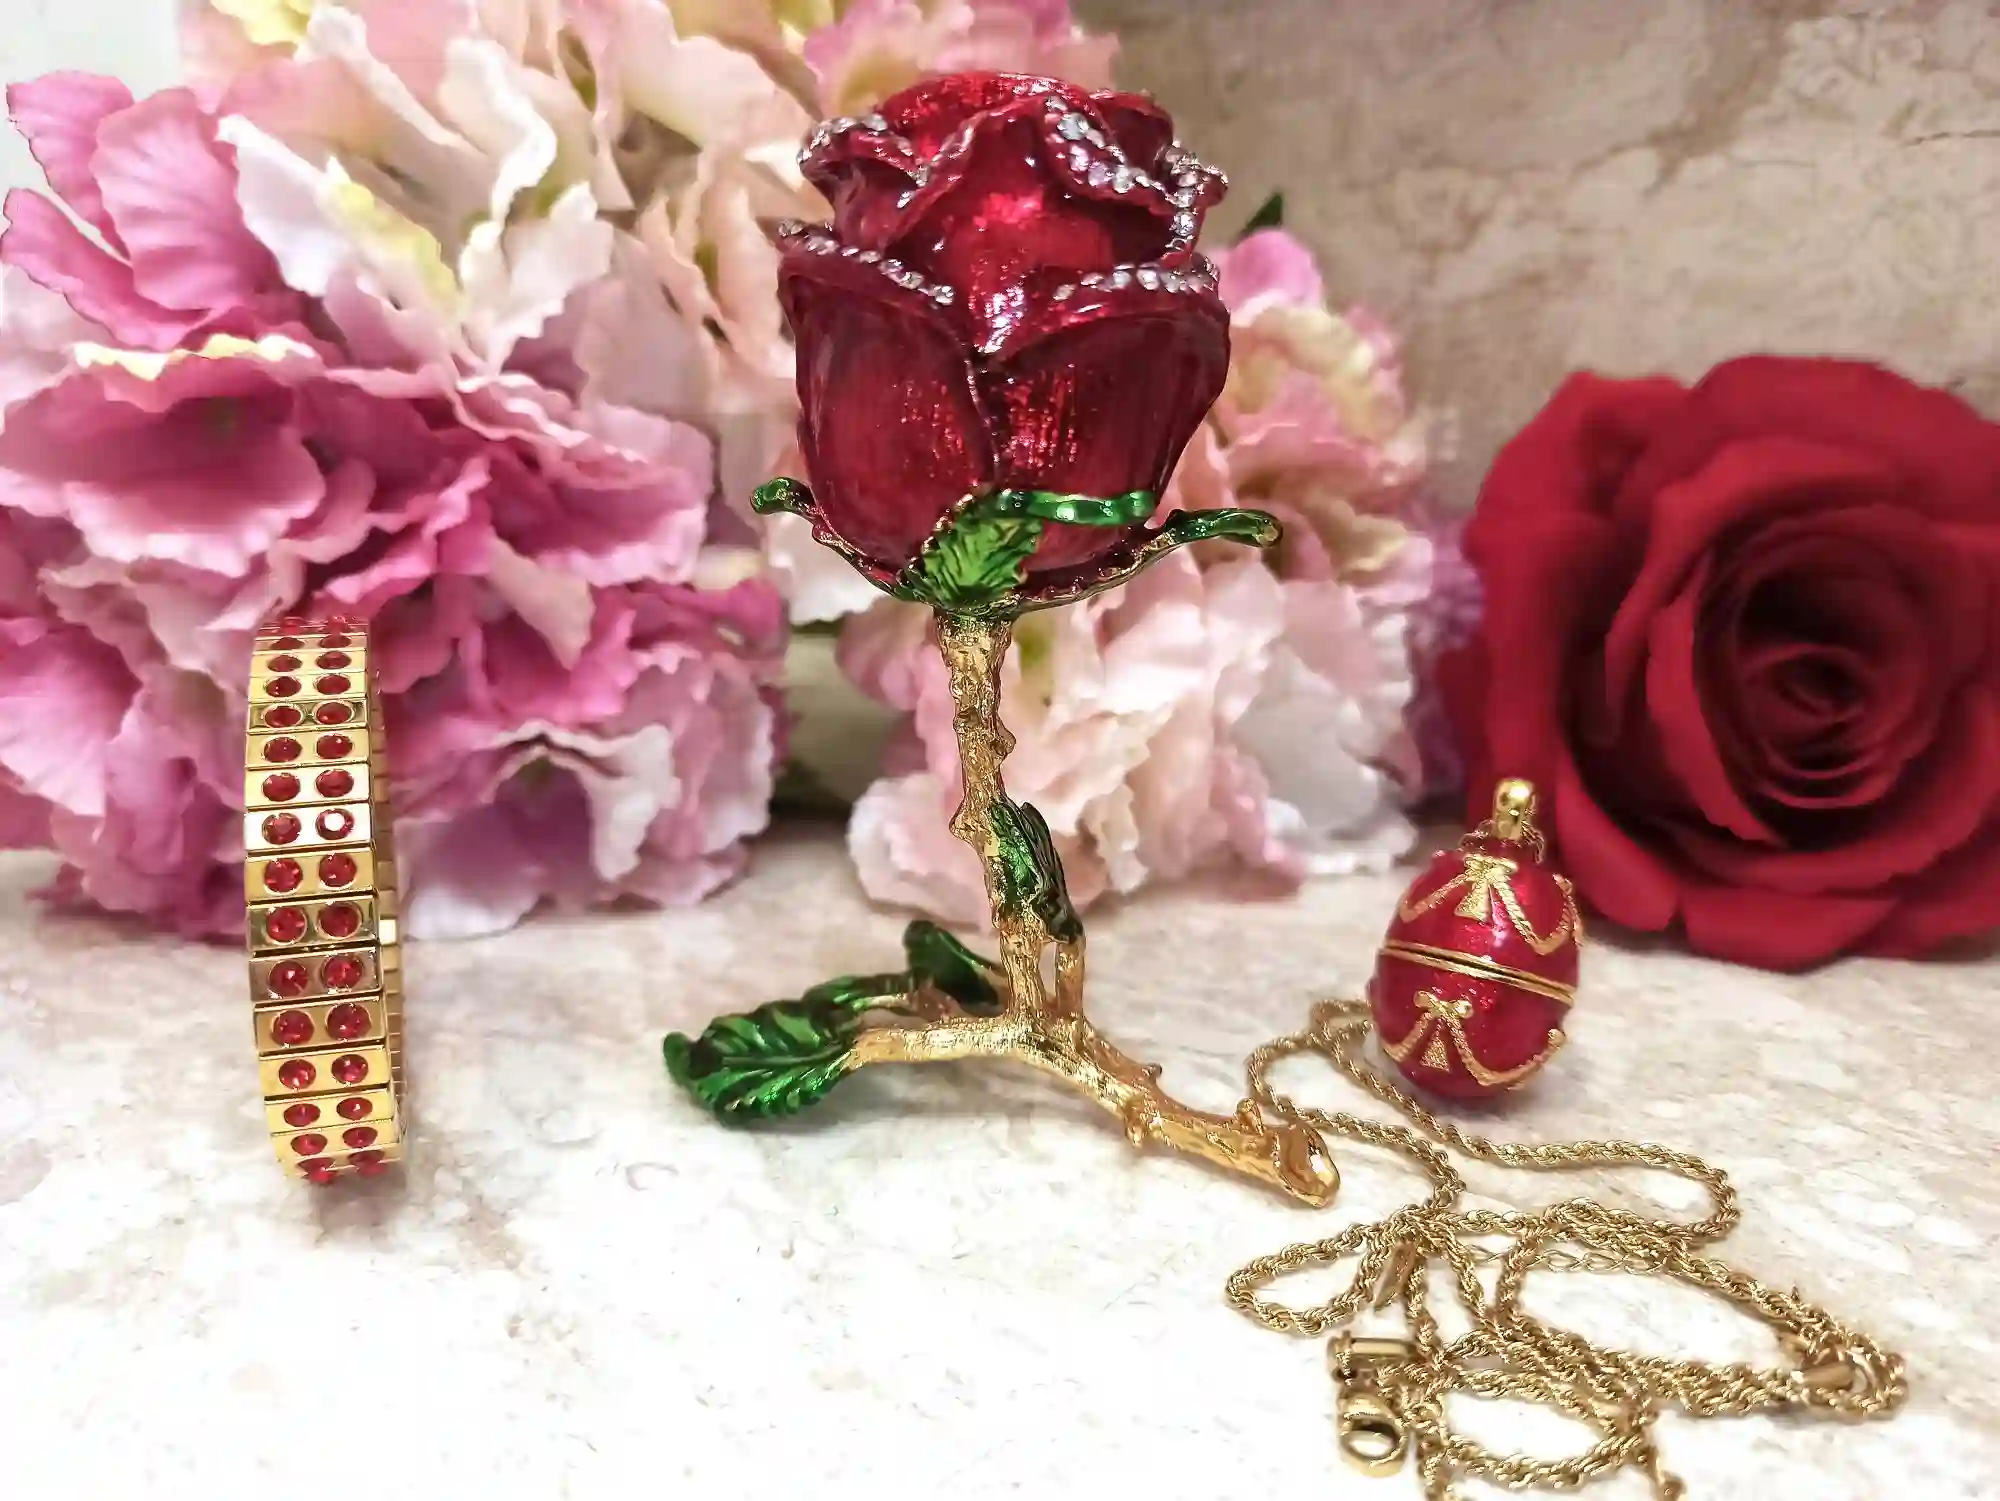 7ct, Faberge egg, Ruby Gift, Luxury gift for her, Rose Jewelry Box + Faberge Egg Necklace + Bracelet,24k GOLD, HANDMADE, Christmas Wife gift 